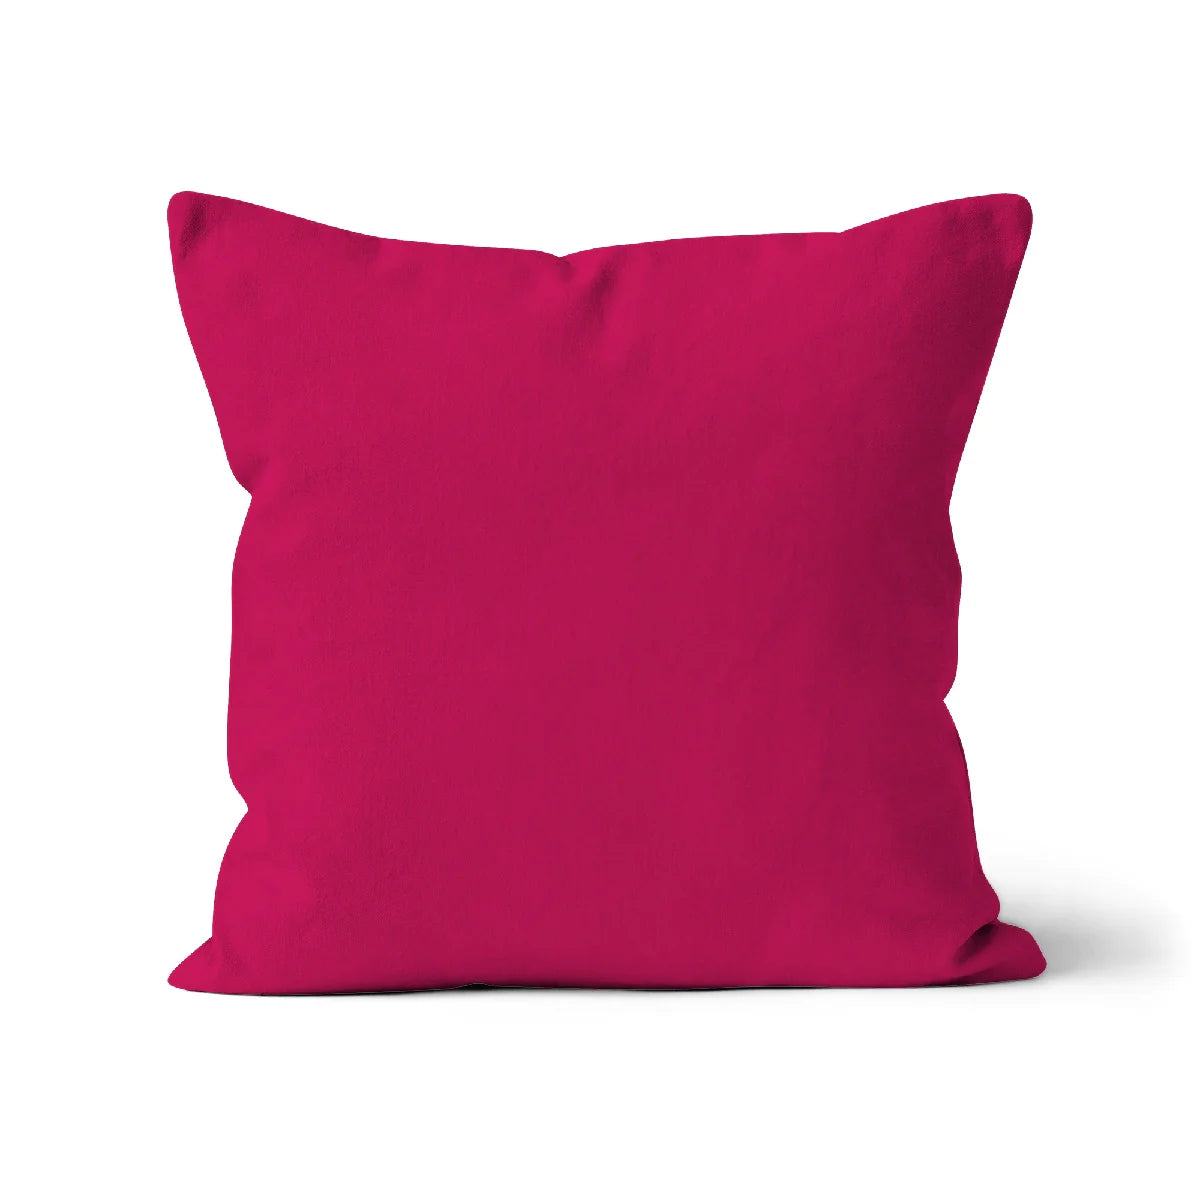 Bright pink scatter cushion cover, organic cotton, sustainably made in britian, machine washable, zip opening, free delivery.